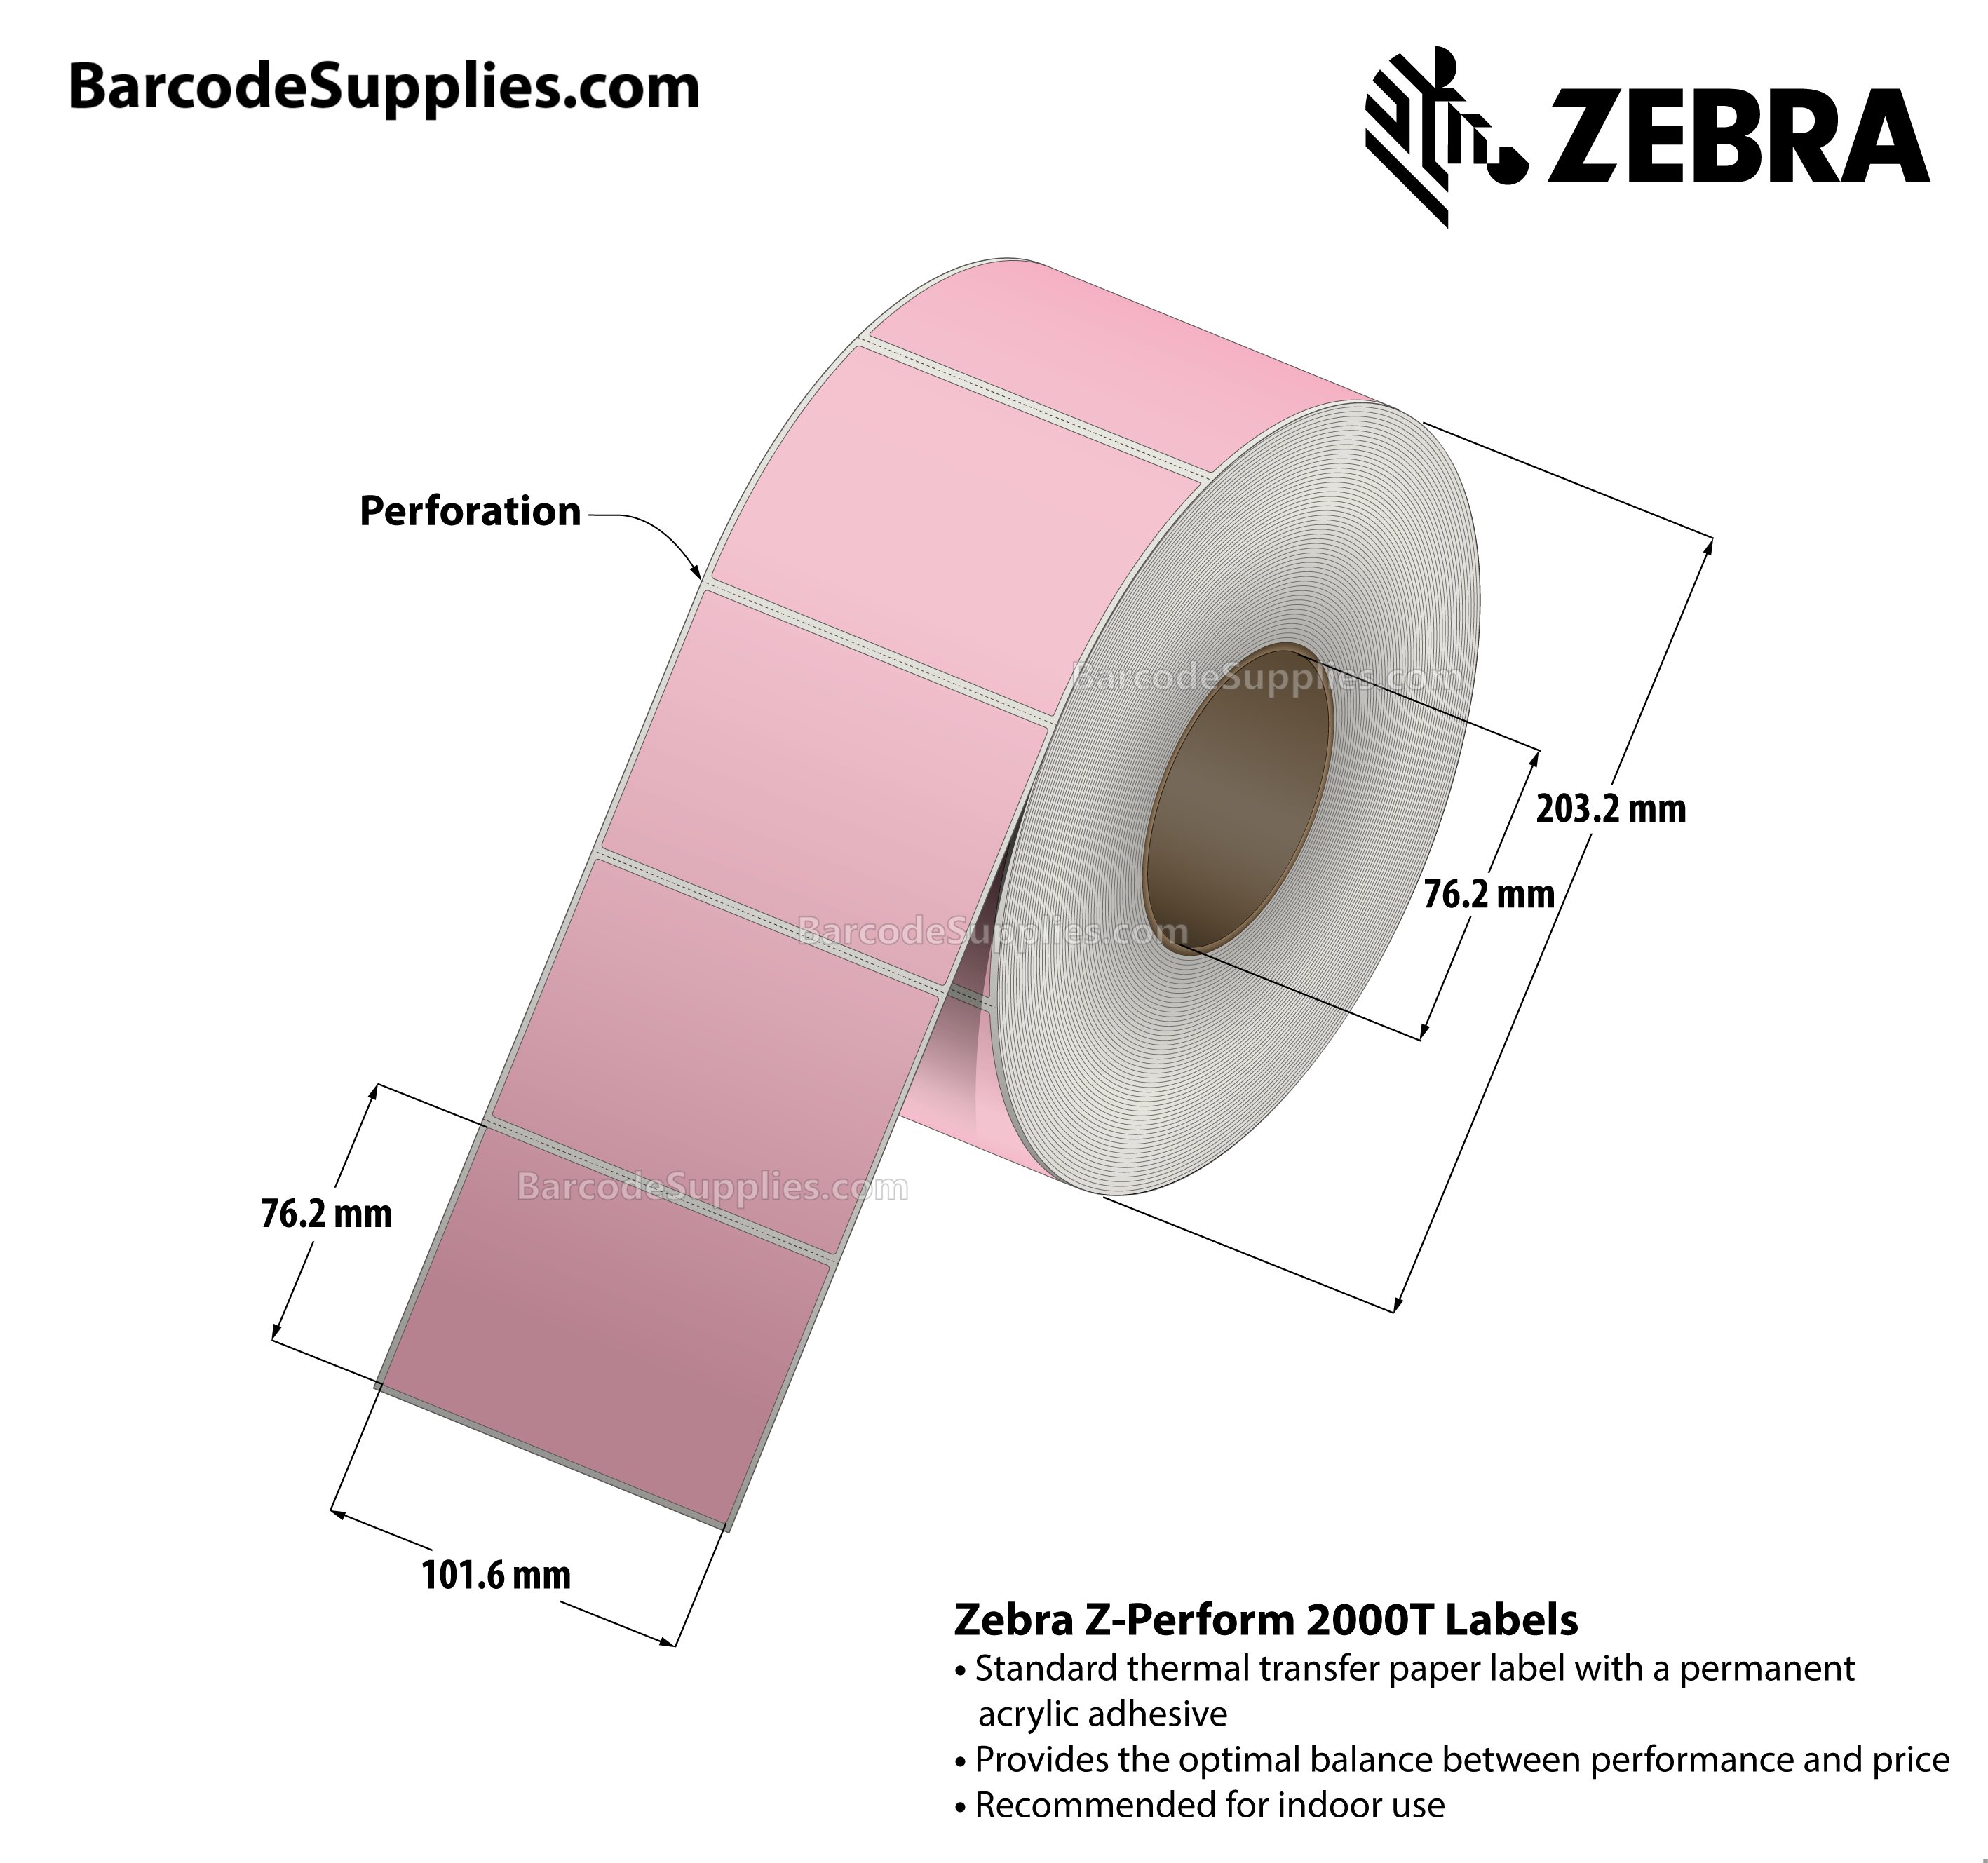 4 x 3 Thermal Transfer Pink - PMS 1767 Z-Perform 2000T Floodcoated (Pink) Labels With Permanent Adhesive - Perforated - 1840 Labels Per Roll - Carton Of 4 Rolls - 7360 Labels Total - MPN: 10006209-3